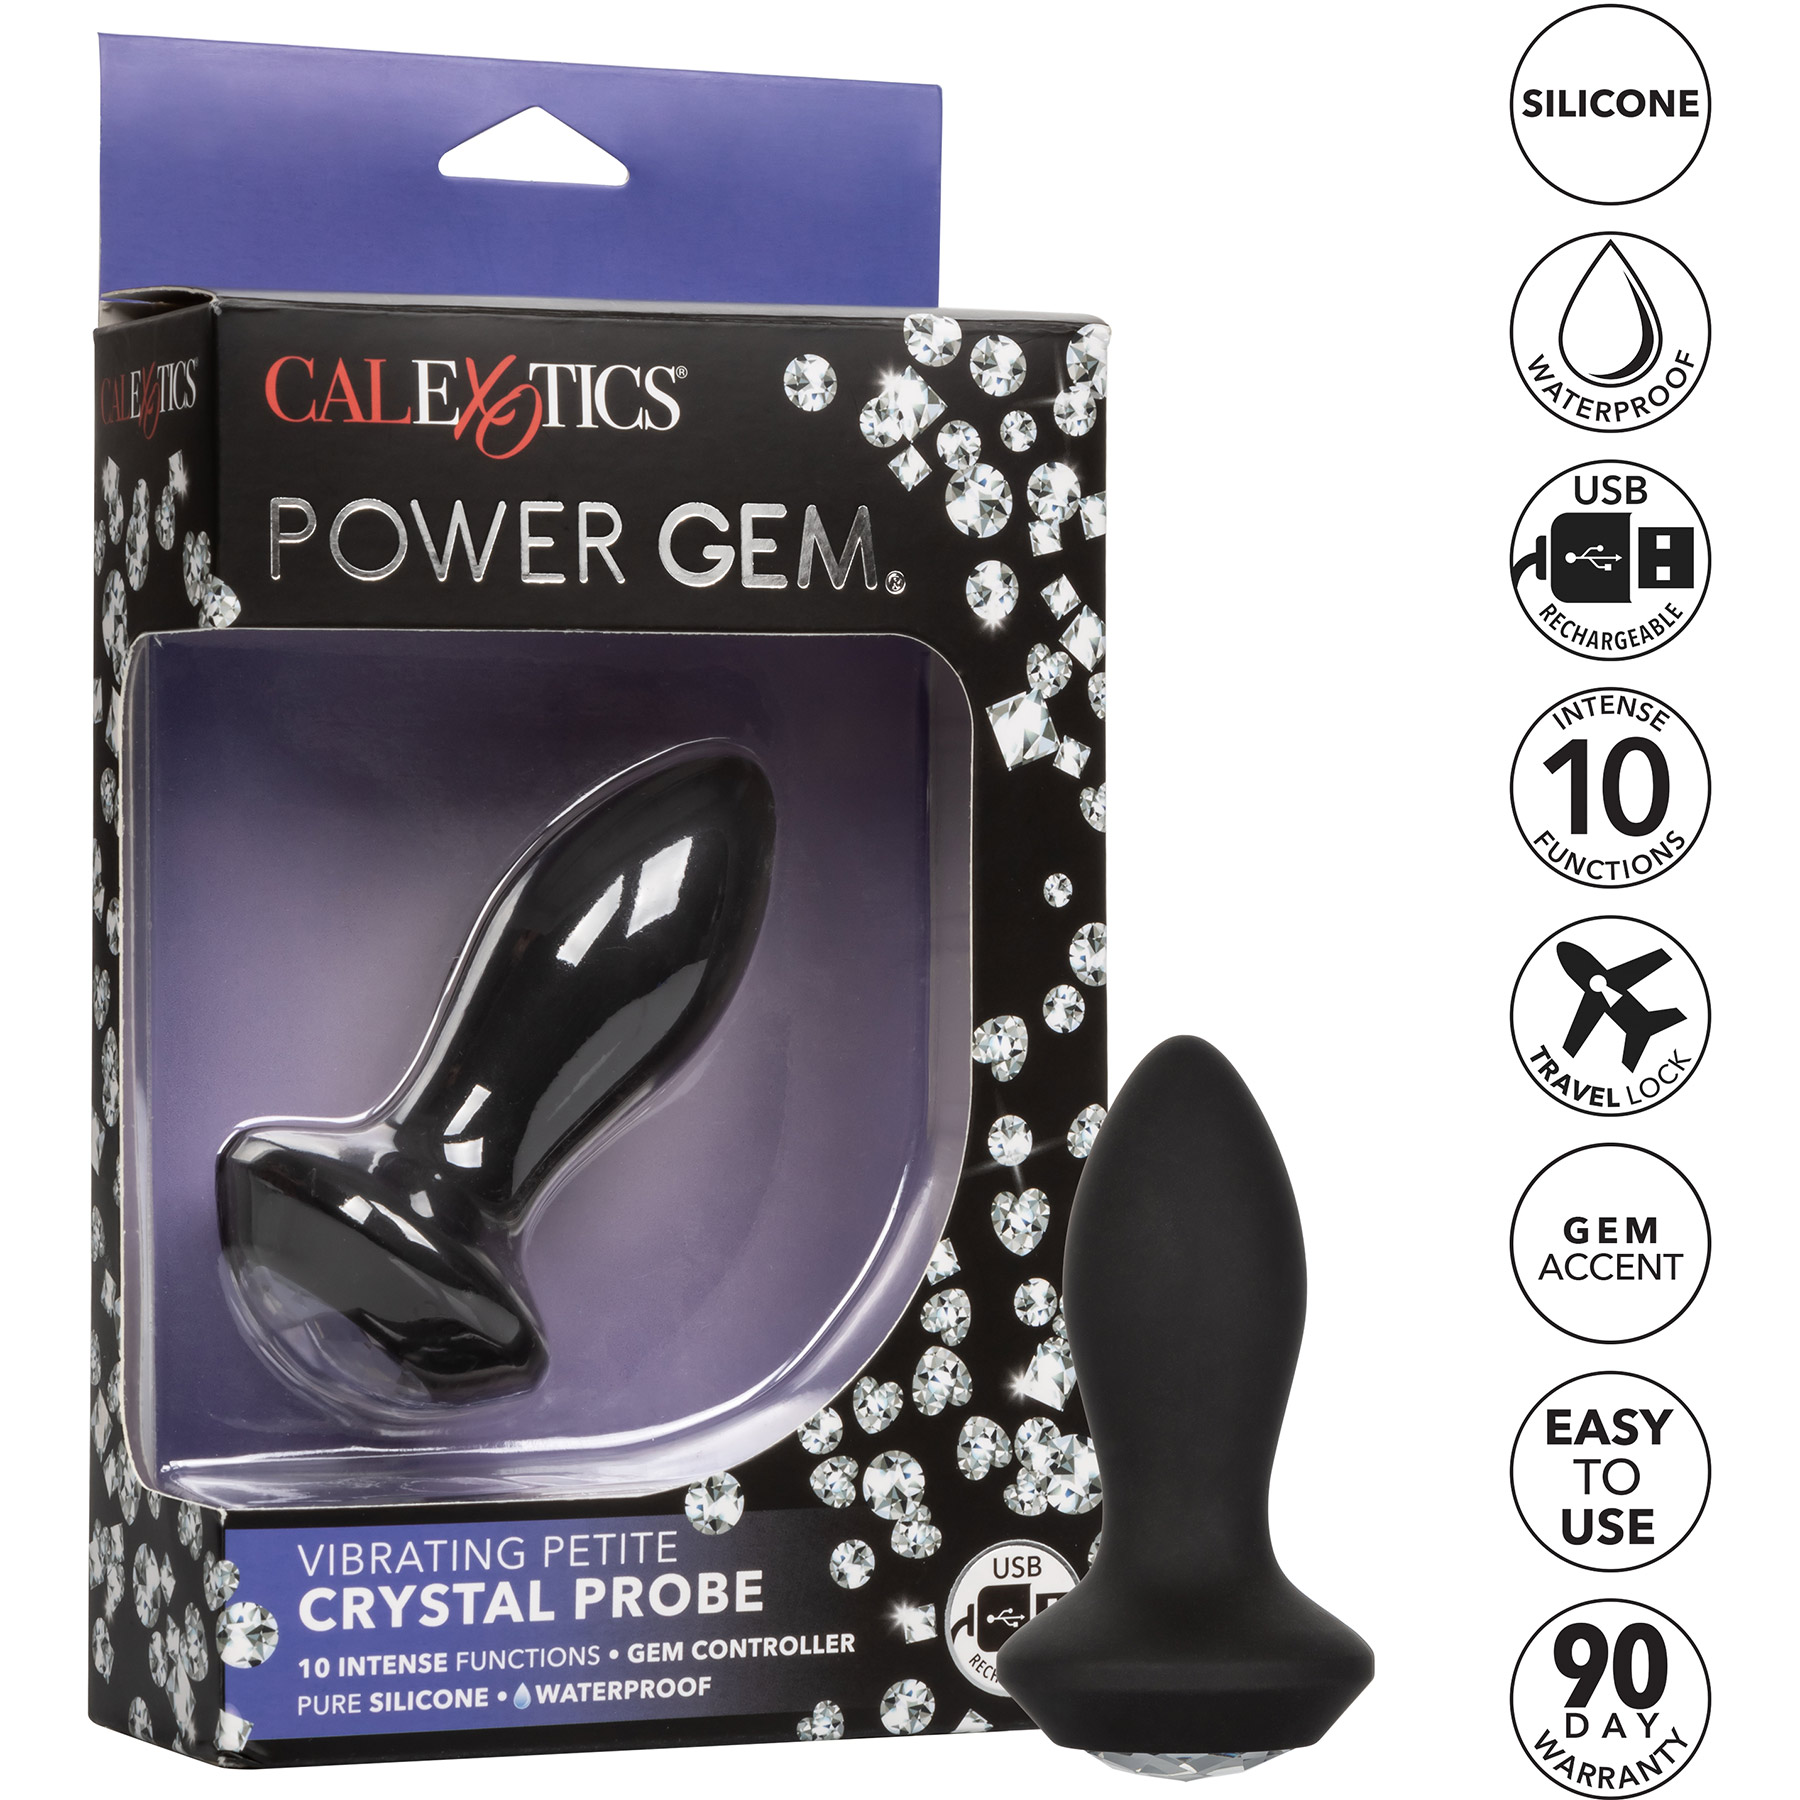 Power Gem Silicone Vibrating Petite Crystal Probe - Package